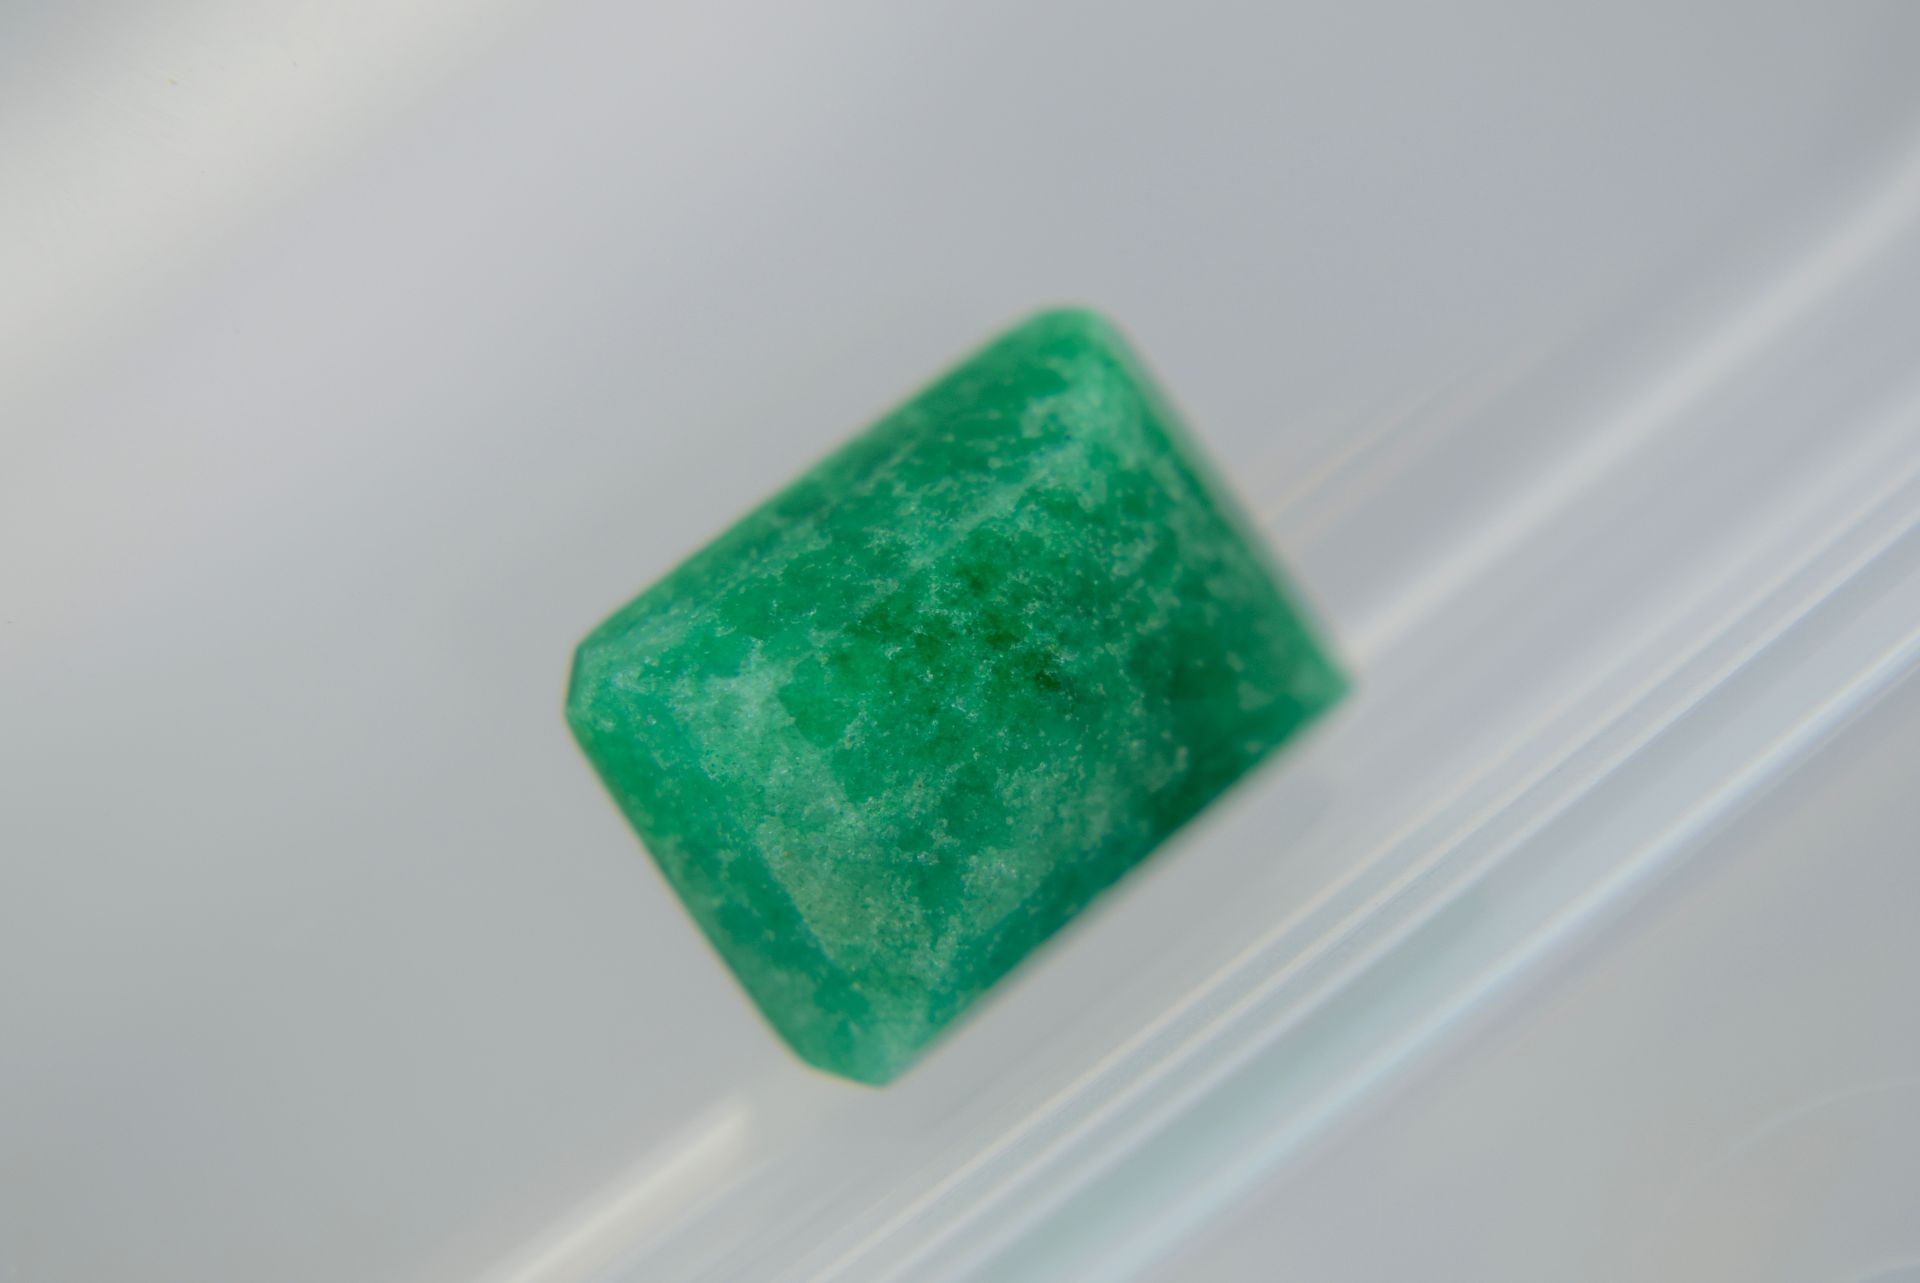 12.865ct Green Stone (Tested as Emerald) - Image 2 of 4